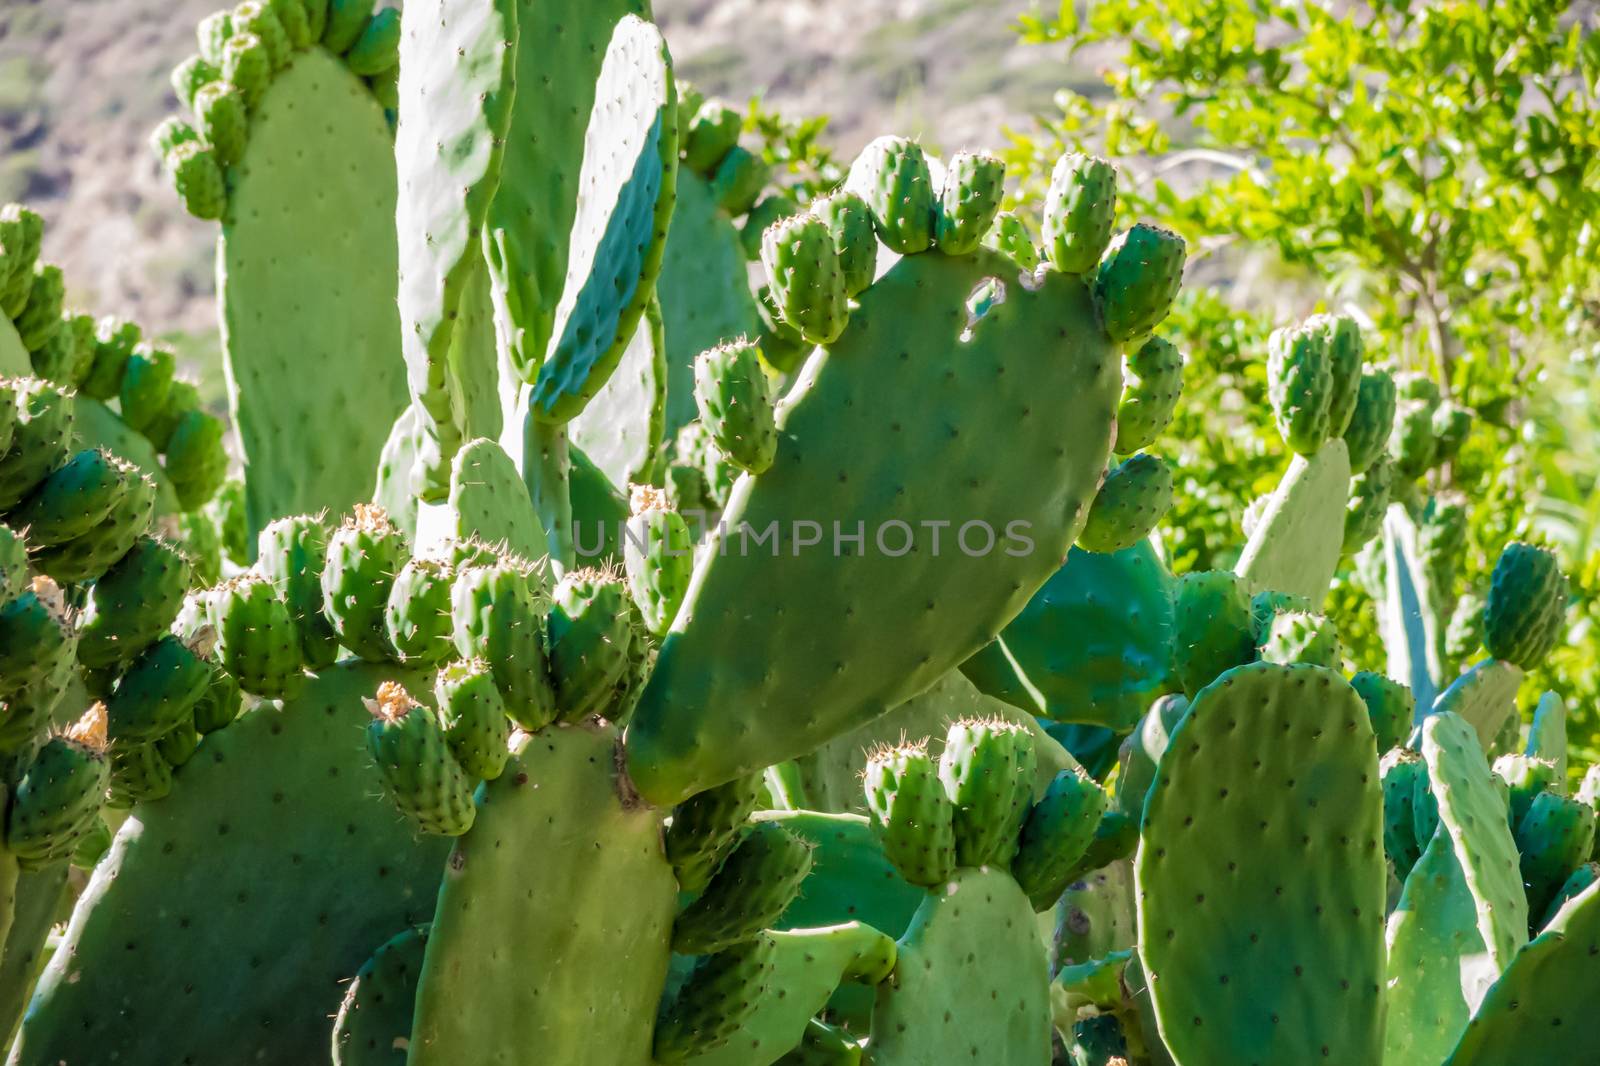 Old cactus plants with many new leafs in direct sunlight by MXW_Stock